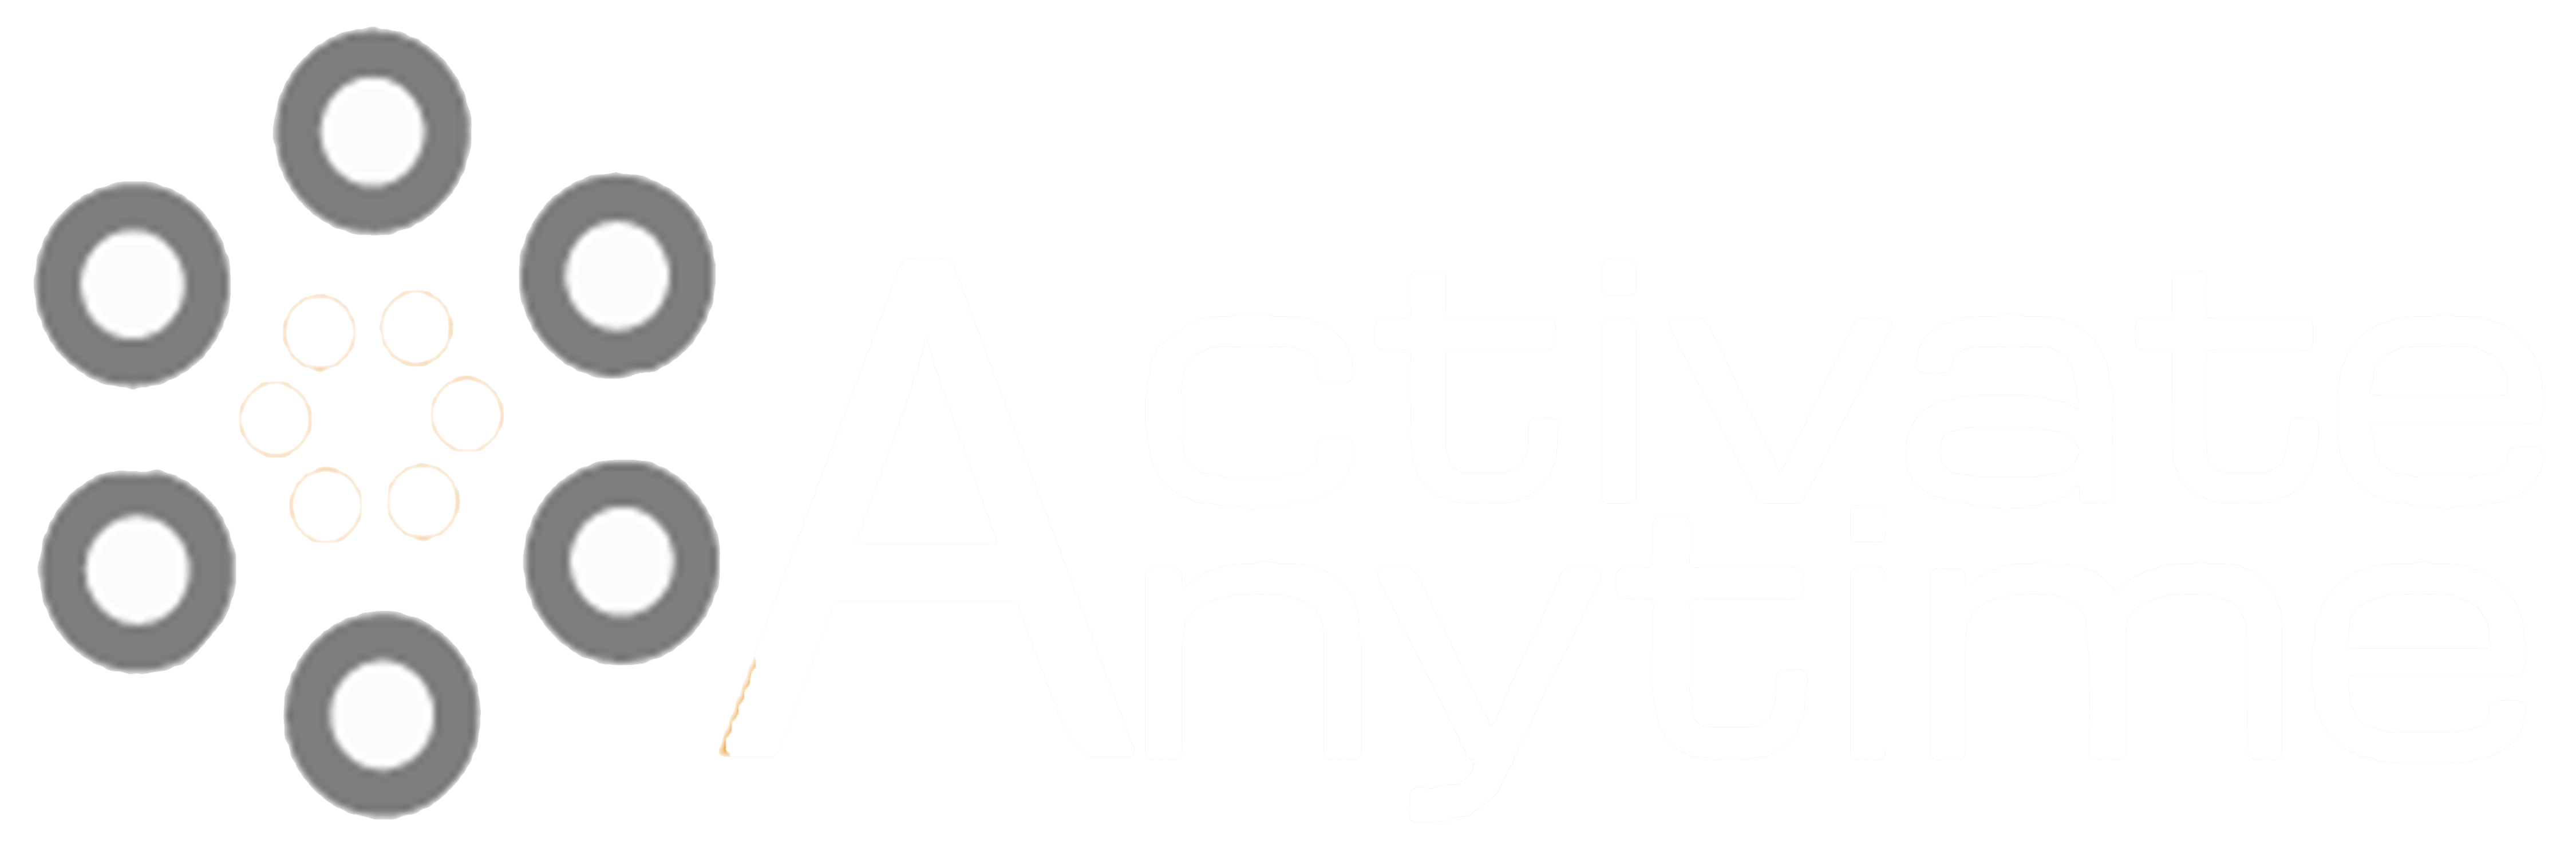 ActivateAnytime - Activation guides for Roku, Channels and Other Devices